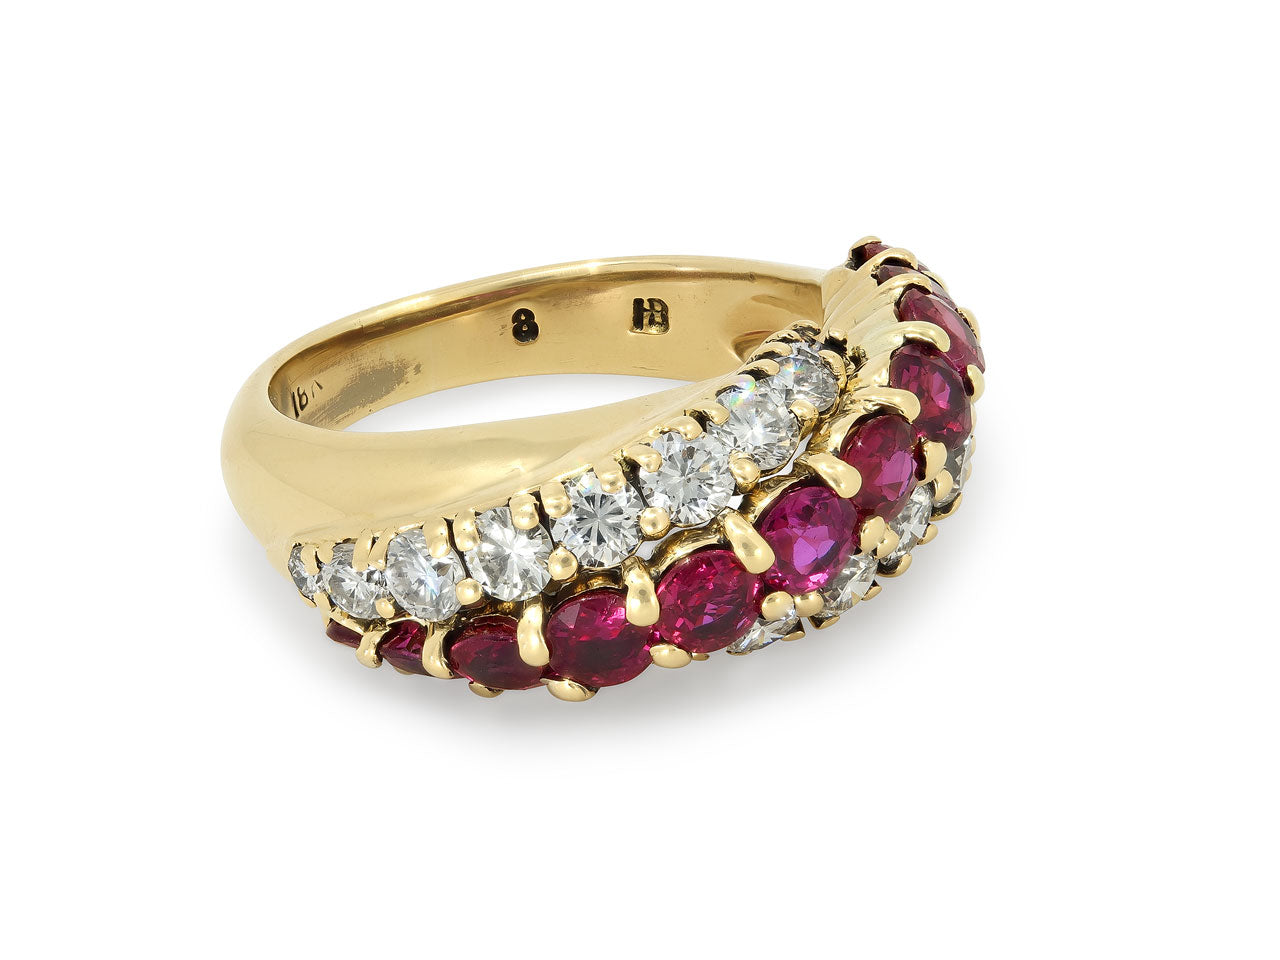 Hammerman Brothers Ruby and Diamond Ring in 18K Gold